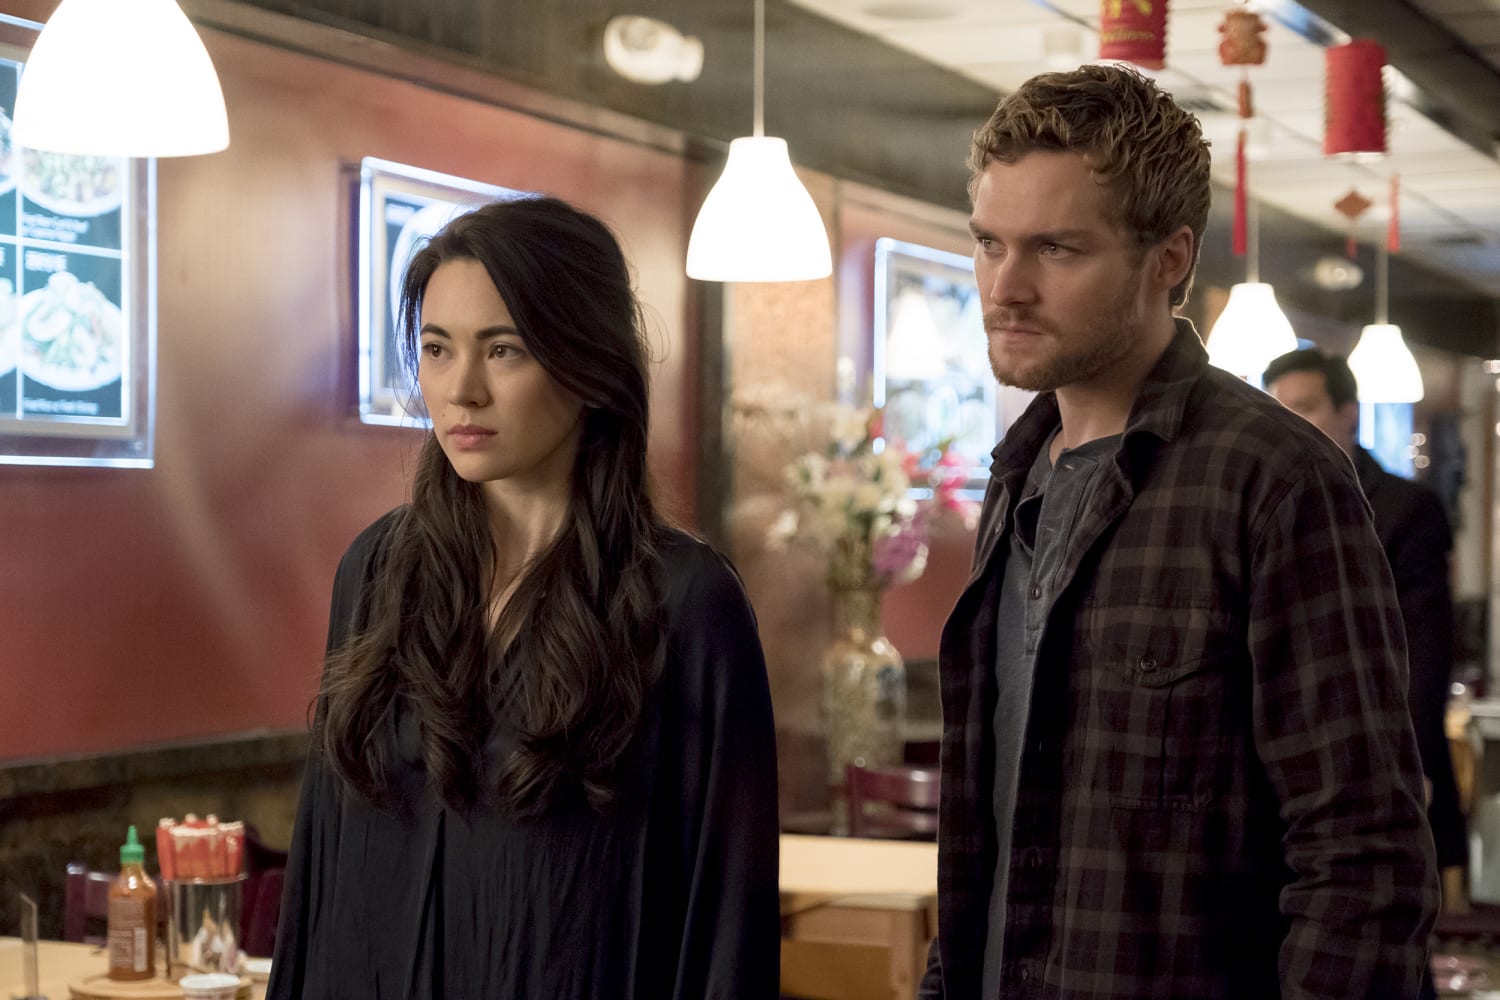 Iron Fist': These Season 1 Characters Will Probably Be Bad Guys in Season 2  and Beyond